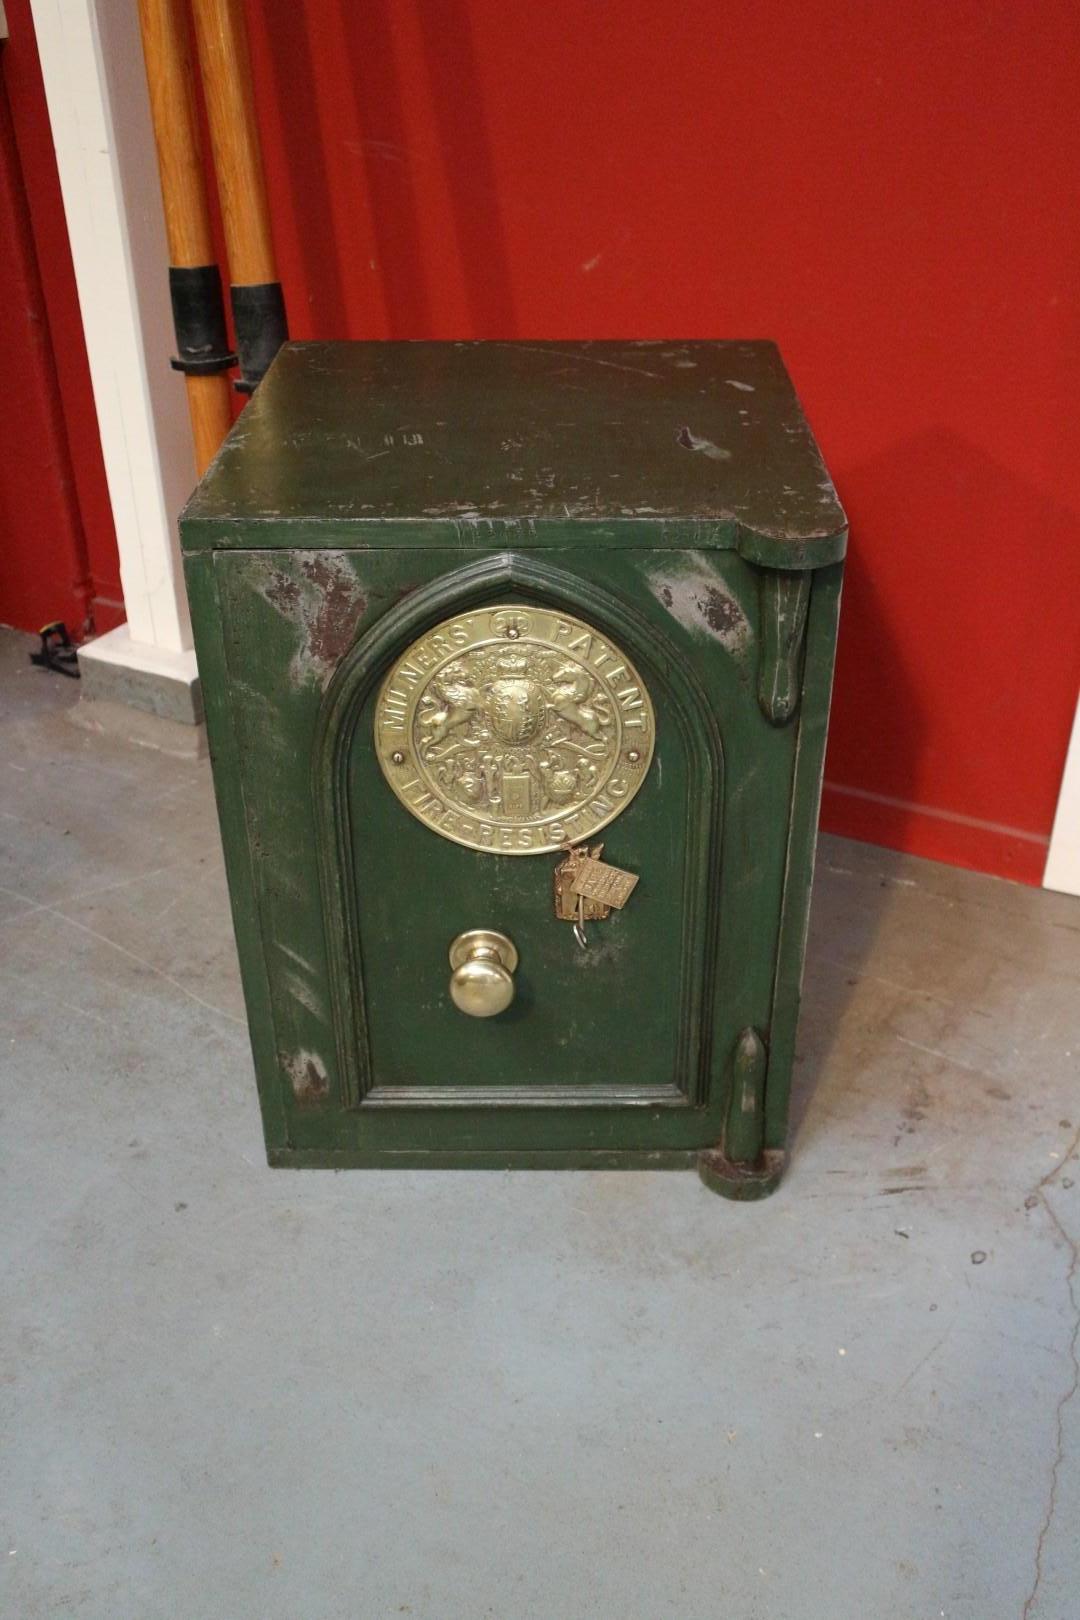 Antique English safe, entirely in original and well-functioning condition. Beautiful lived-in look. It is a safe from the Milner firm of Liverpool & London. The special thing about this safe is that it has a powder-proof solid lock. This means that